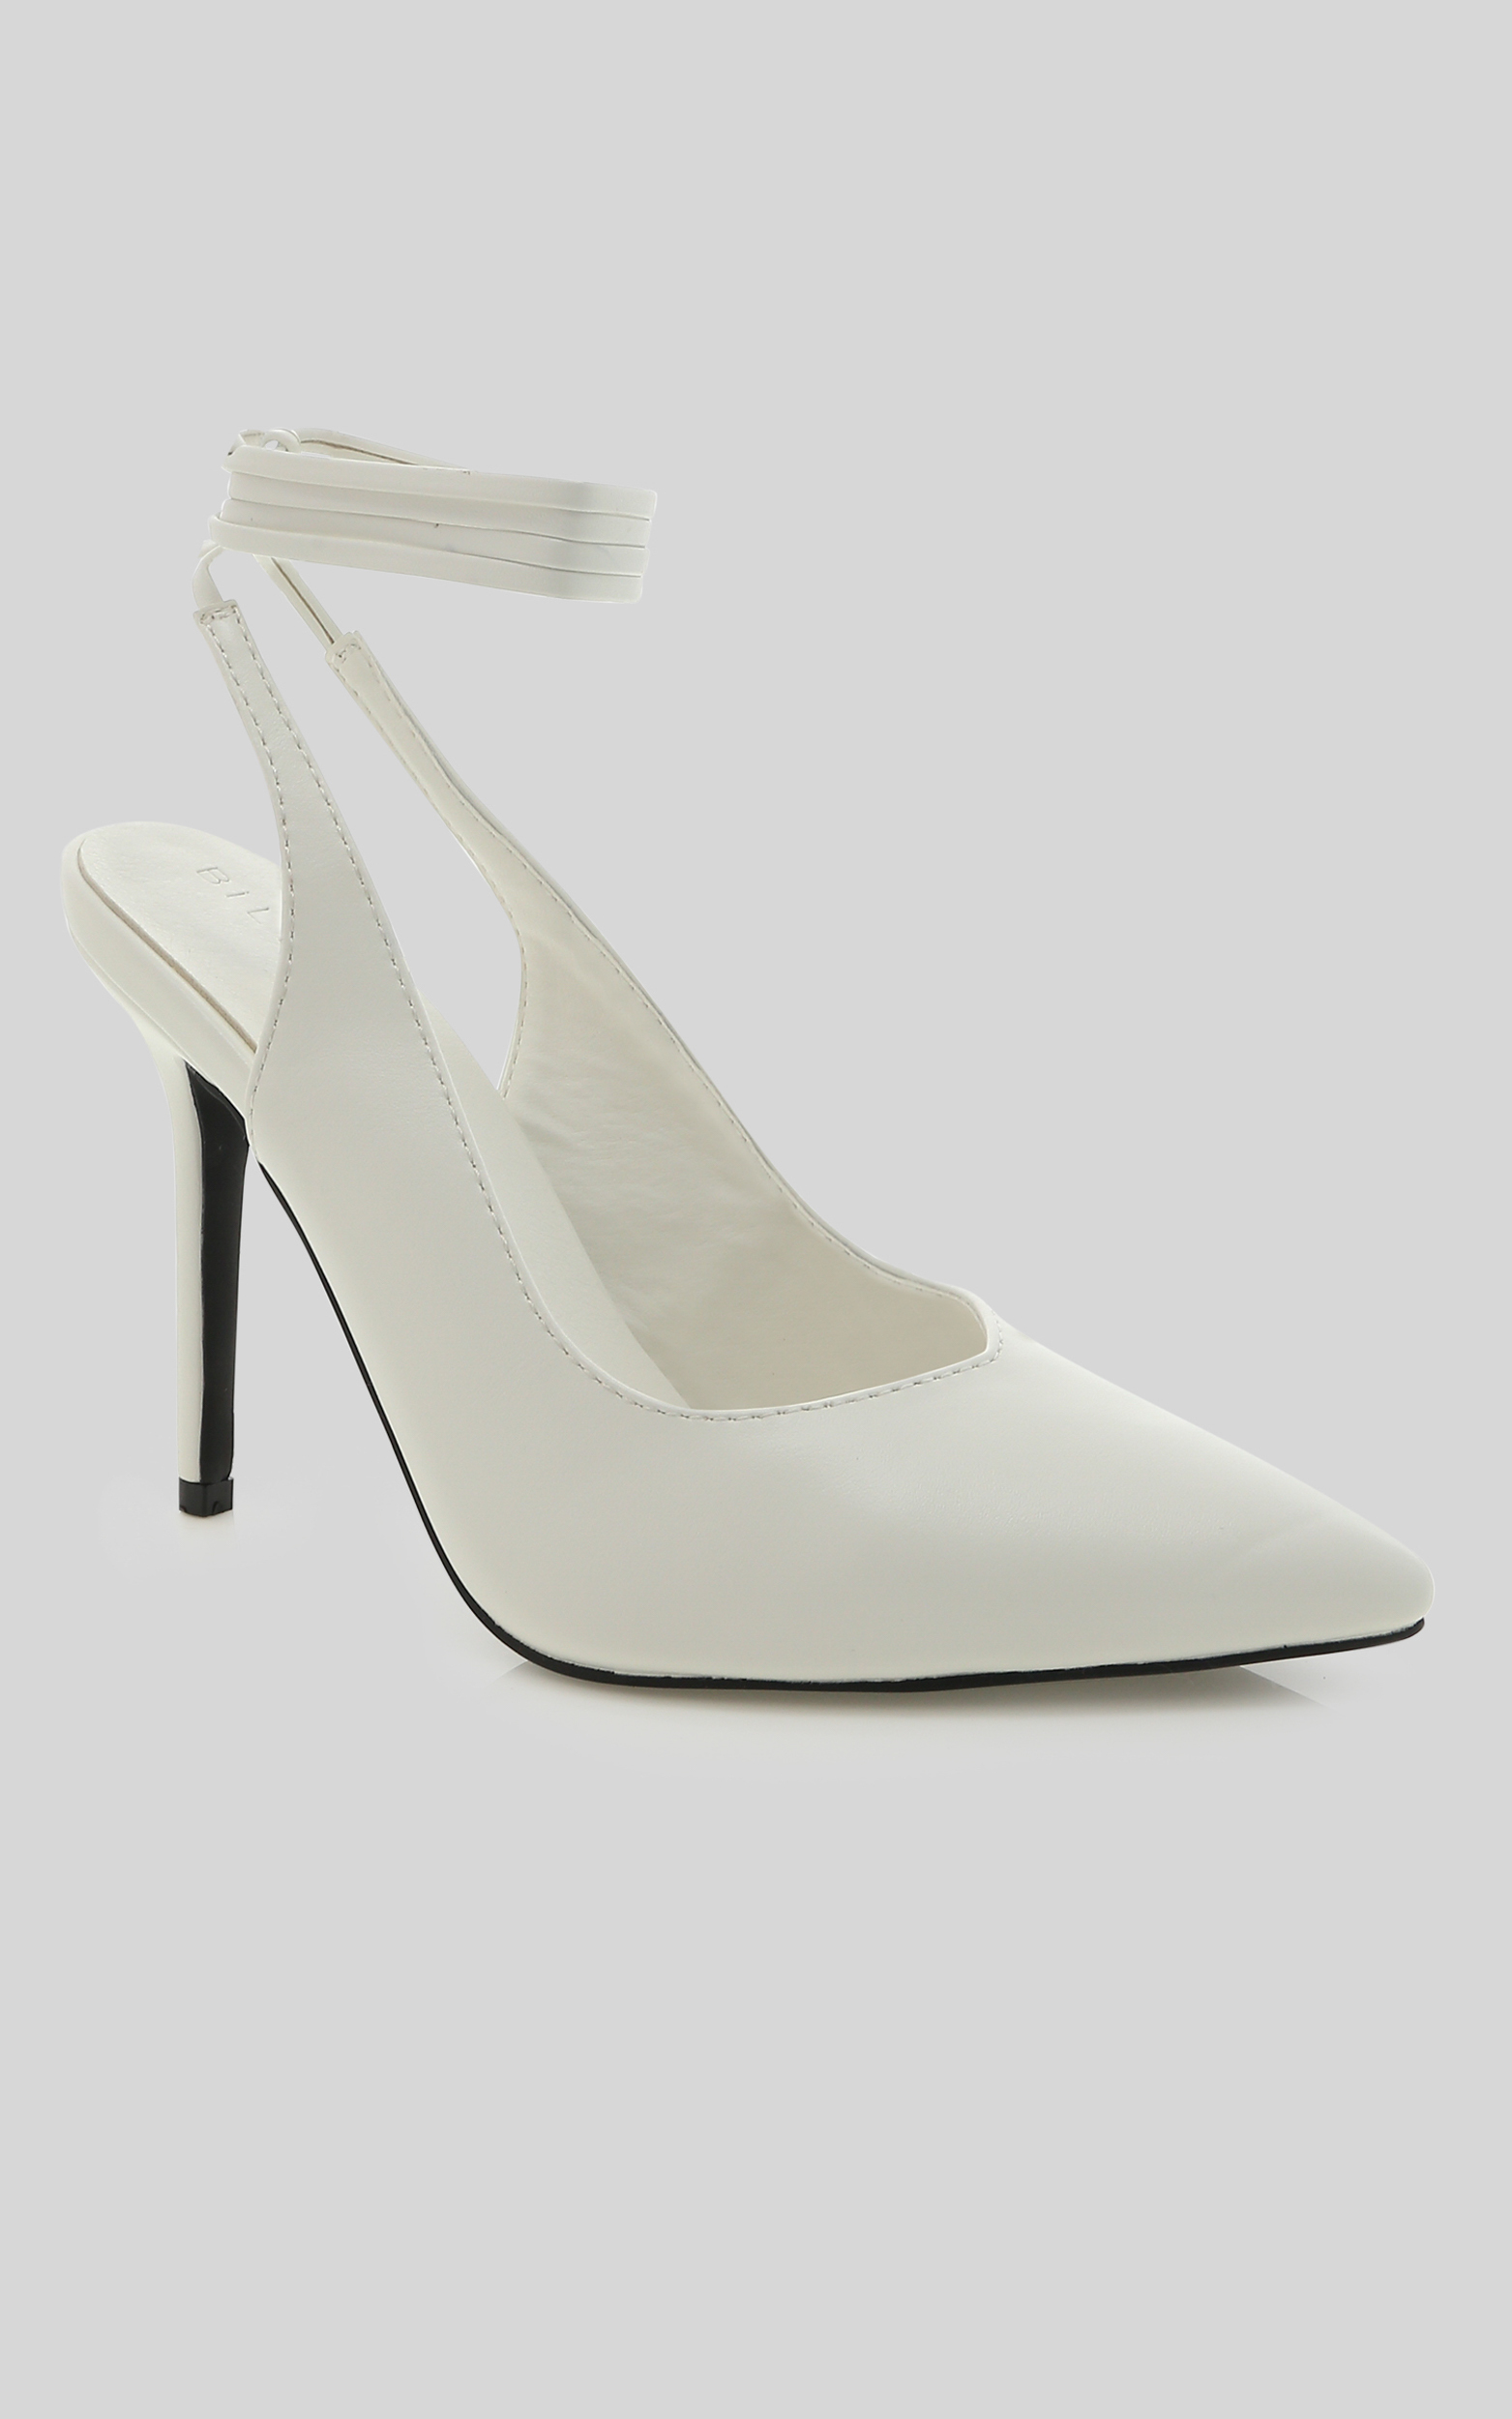 Billini - SASS Heels in White - 06, WHT1, hi-res image number null